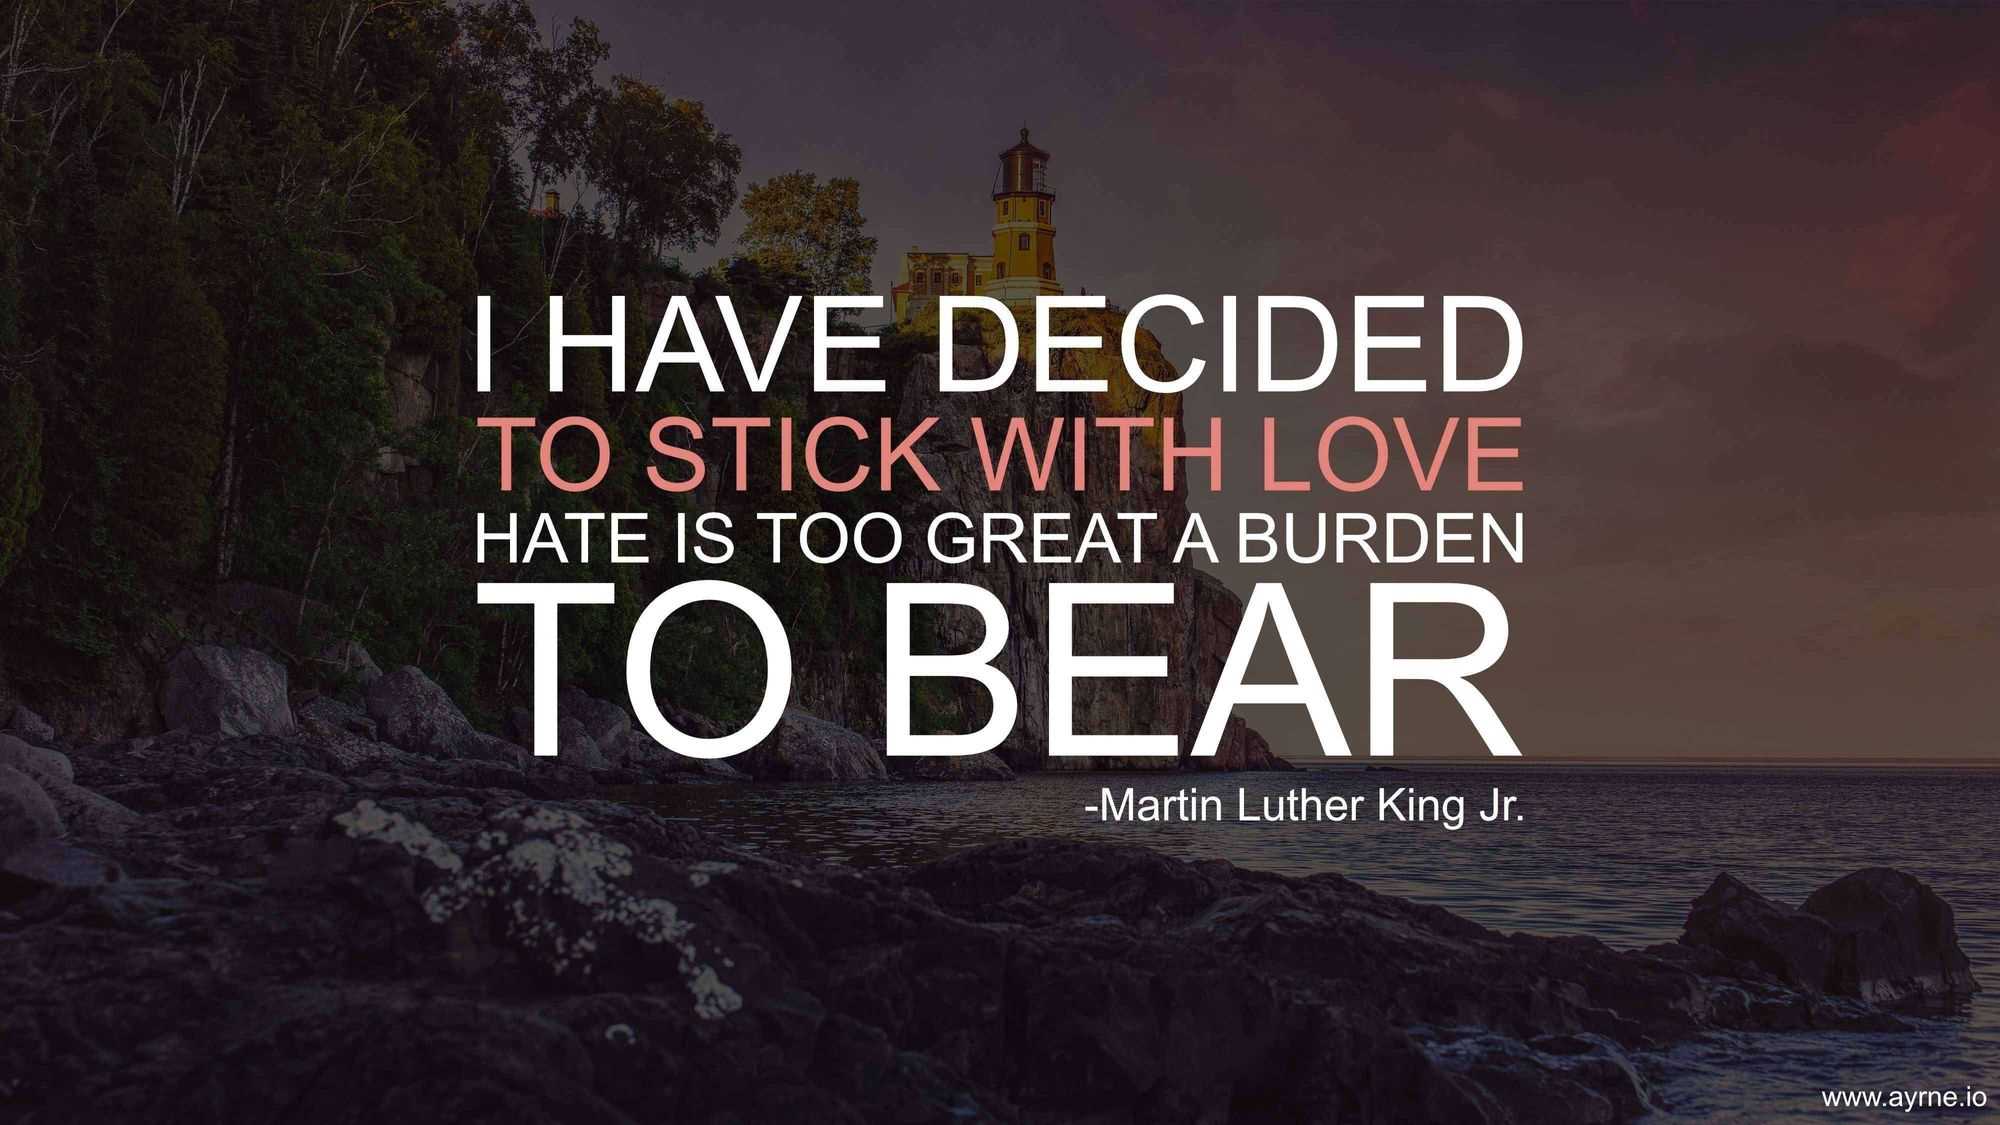 I have decided to stick with love. Hate is too great a burden to bear.